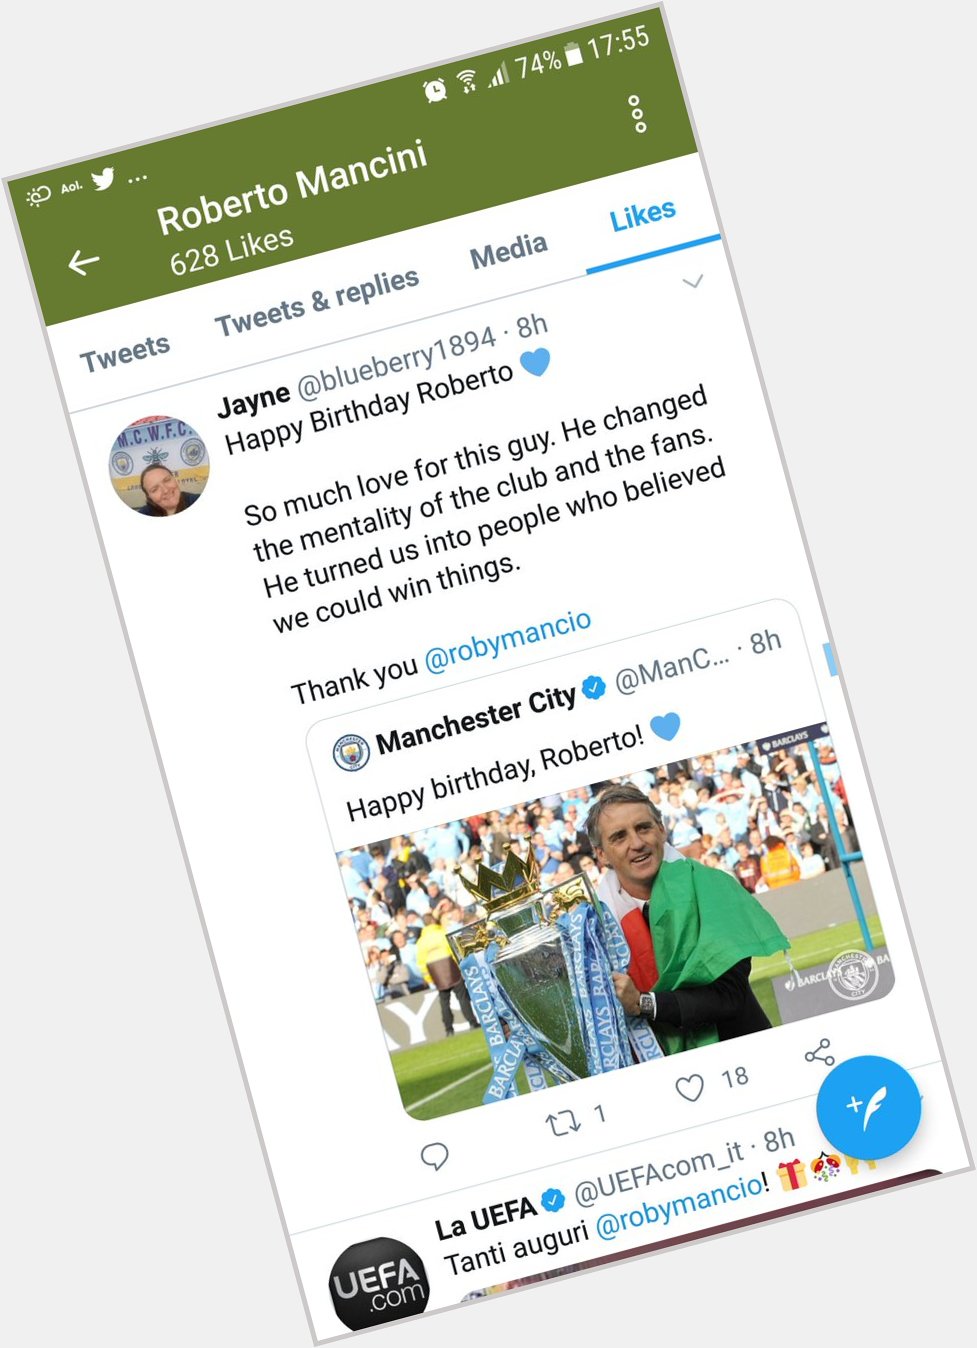 My life is complete........Roberto Mancini liked my message wishing him a happy birthday   